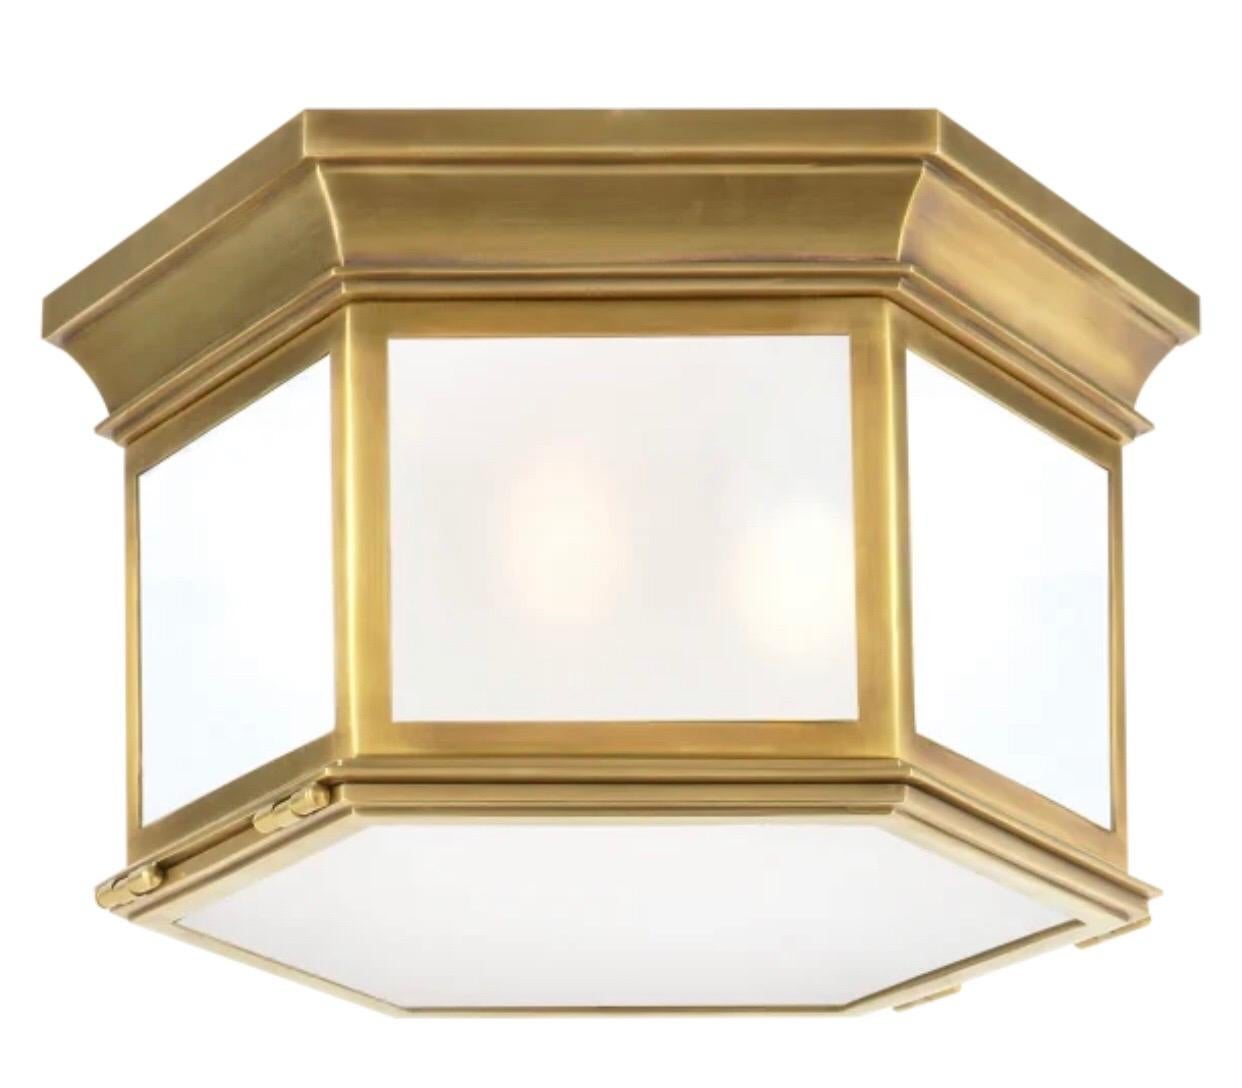 4 Elegant French Mid-Century Modern Neoclassical style antiqued brass flush mount fixtures in a hexagonal pattern and with satinized glass. The pieces are in the style of Jacques Quinet and can also be customized with clear glass and / or in a